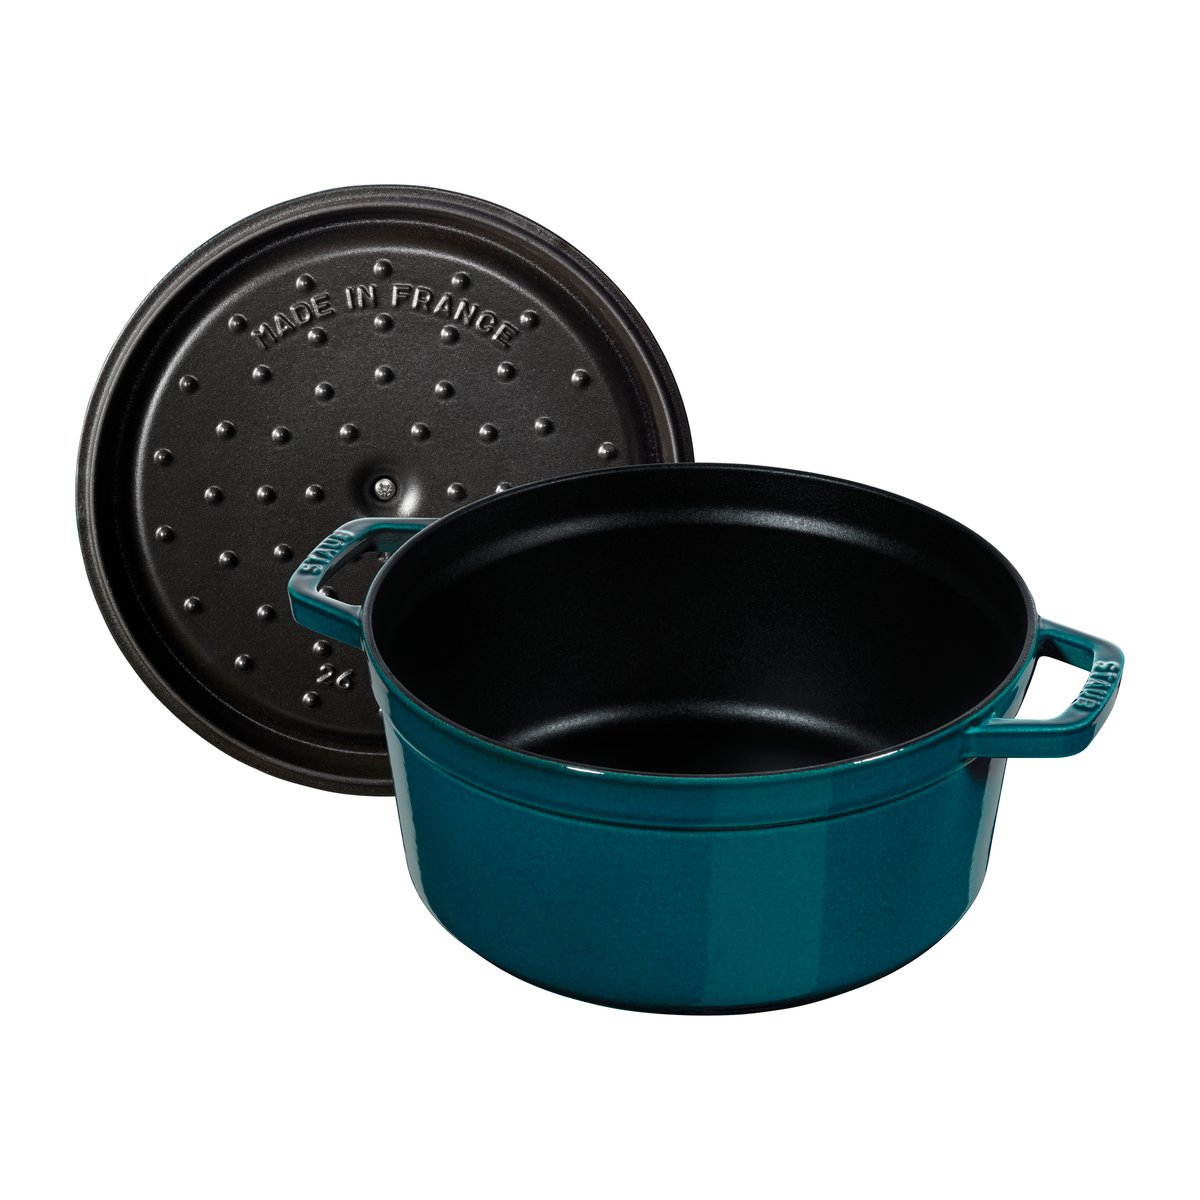 STAUB La Mer ronde braadpan, drielaags emaille 5,2 l